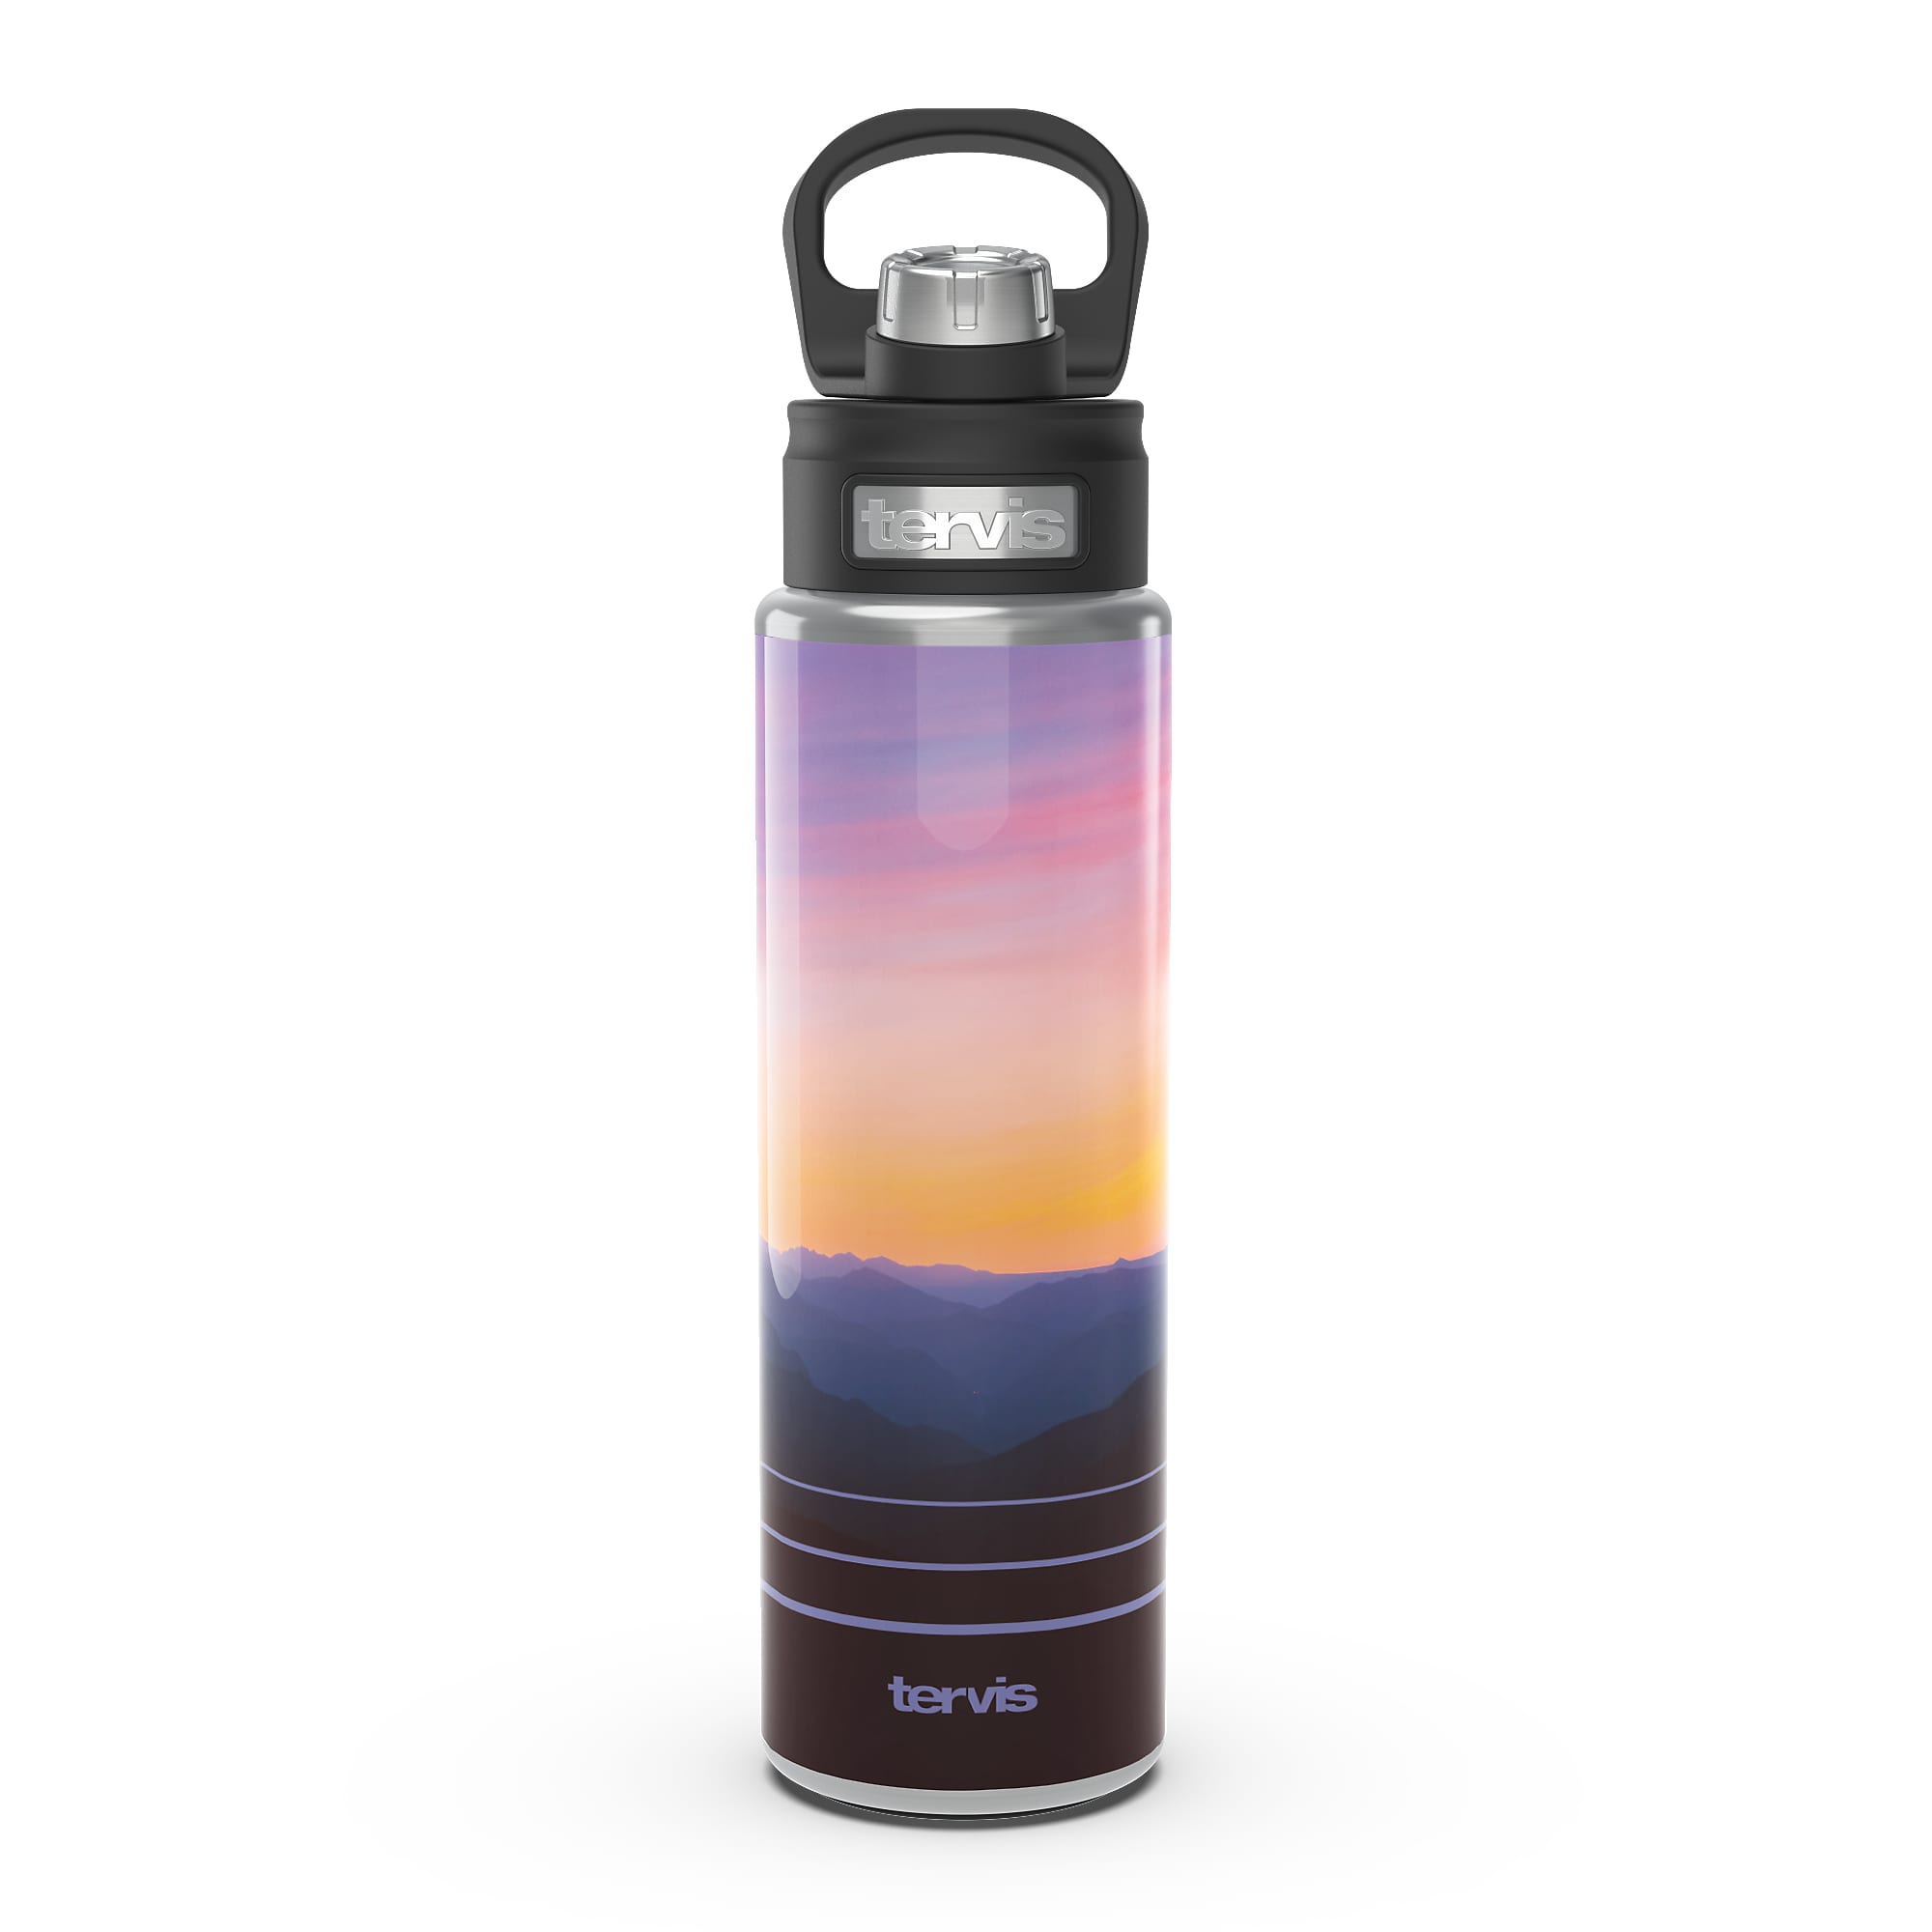 Tervis 24 oz. Wide Mouth Bottle - Early Mountain Mornings